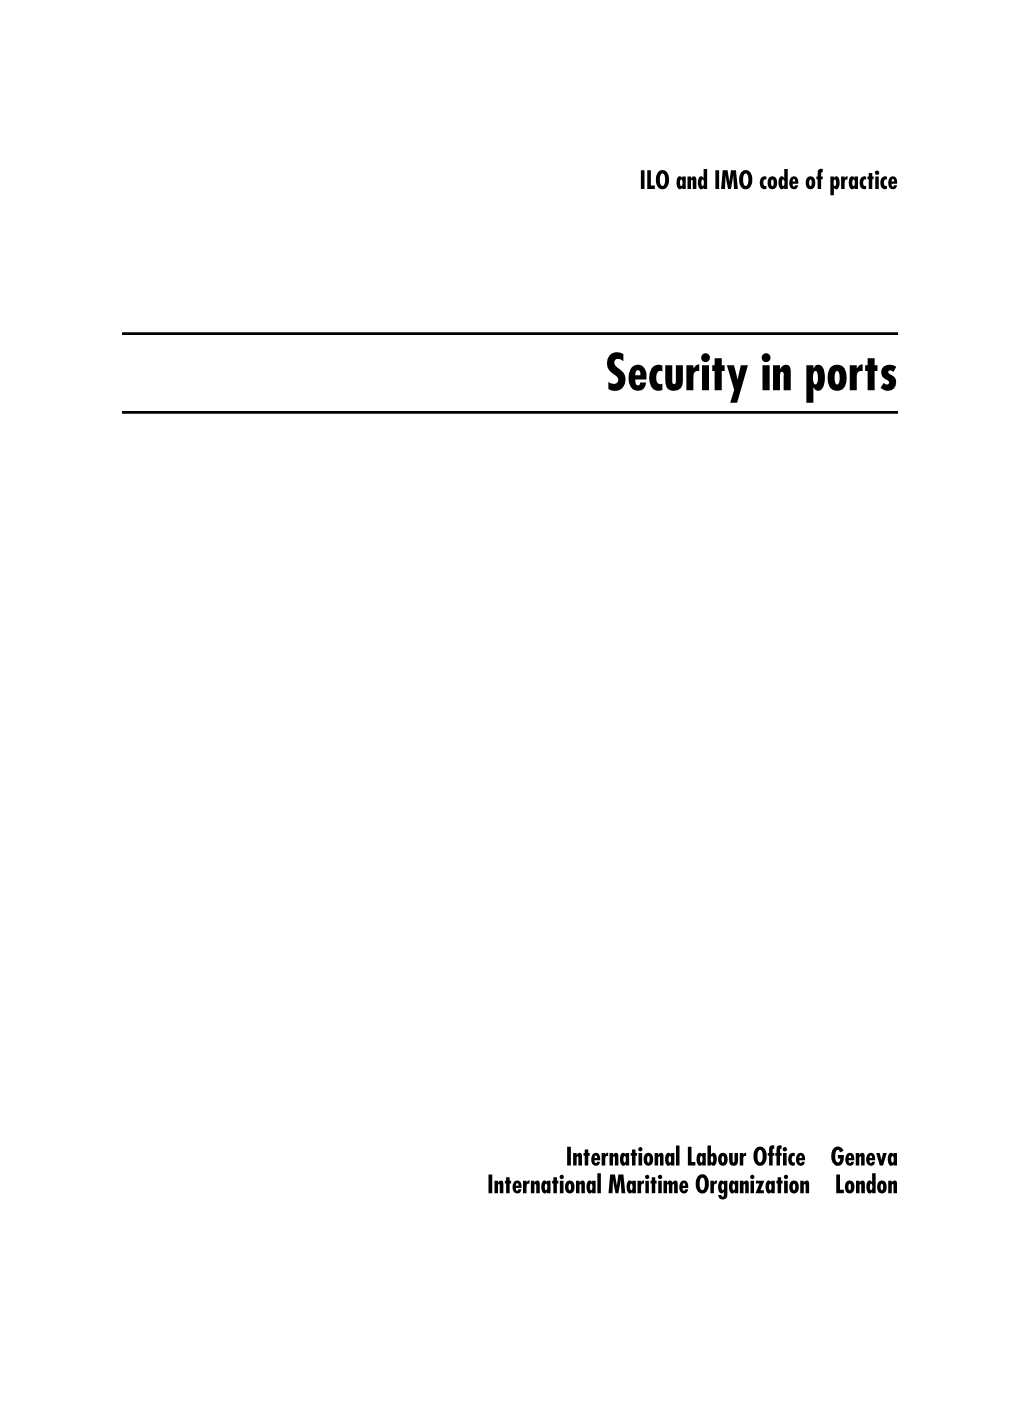 Security in Ports